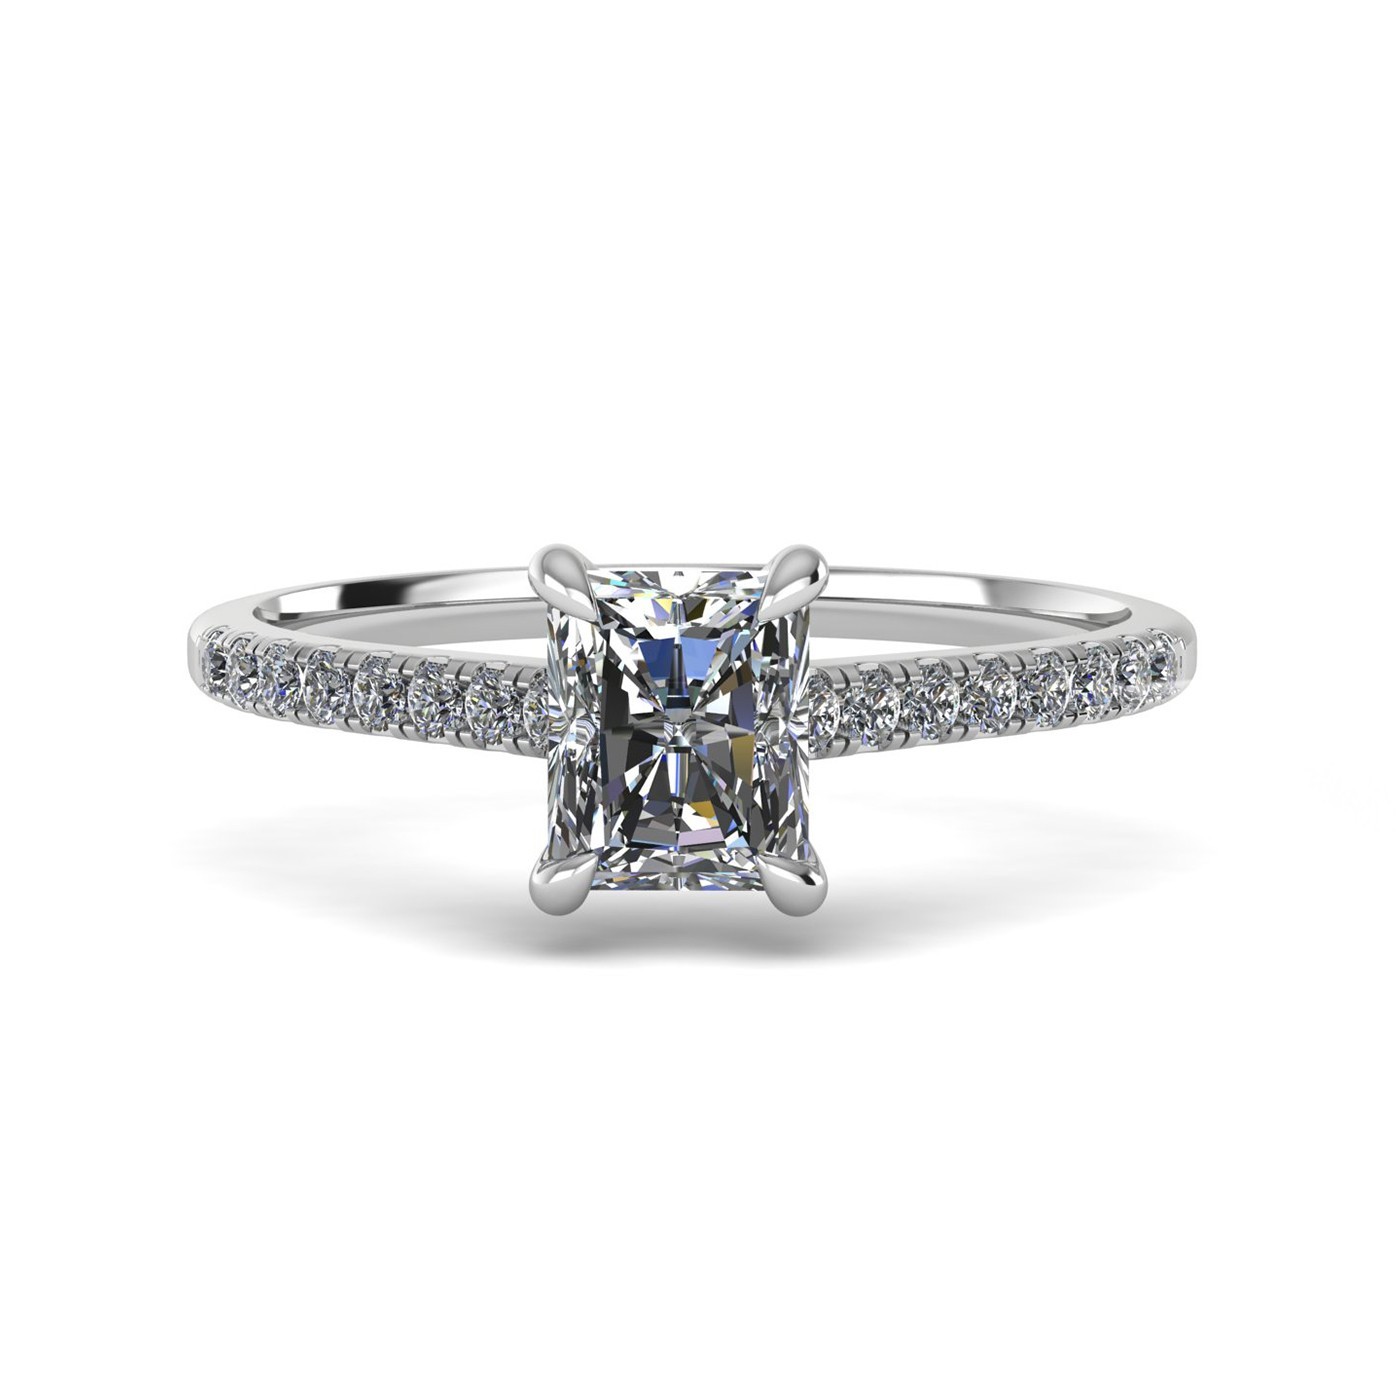 18k white gold  1,50 ct 4 prongs radiant cut diamond engagement ring with whisper thin pavÉ set band Photos & images